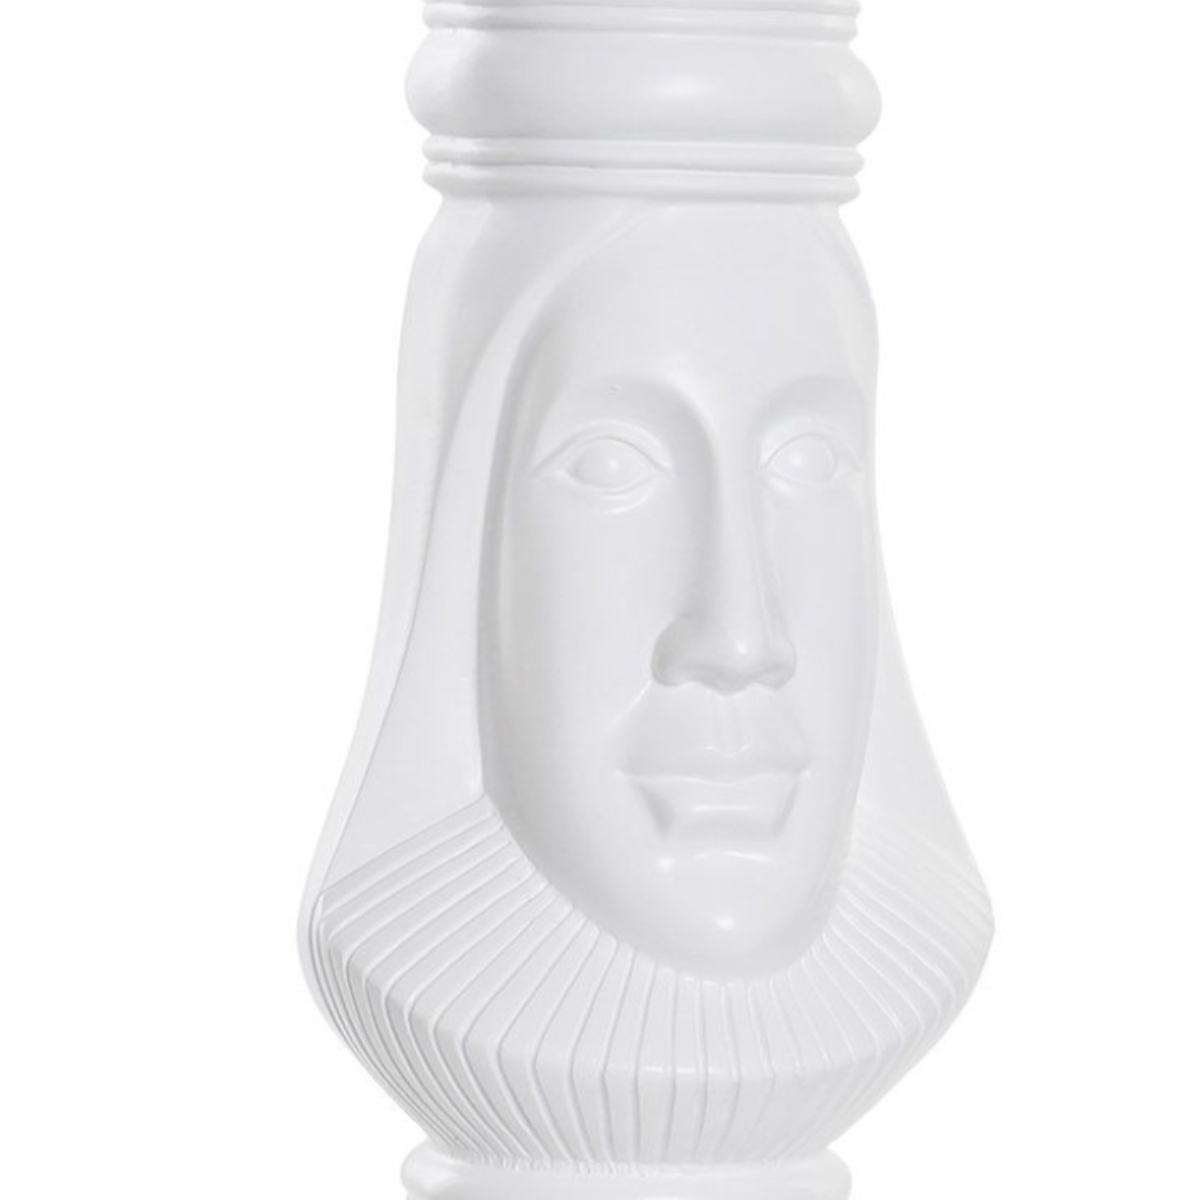 Lady chess piece figurine in white resin 39 cm